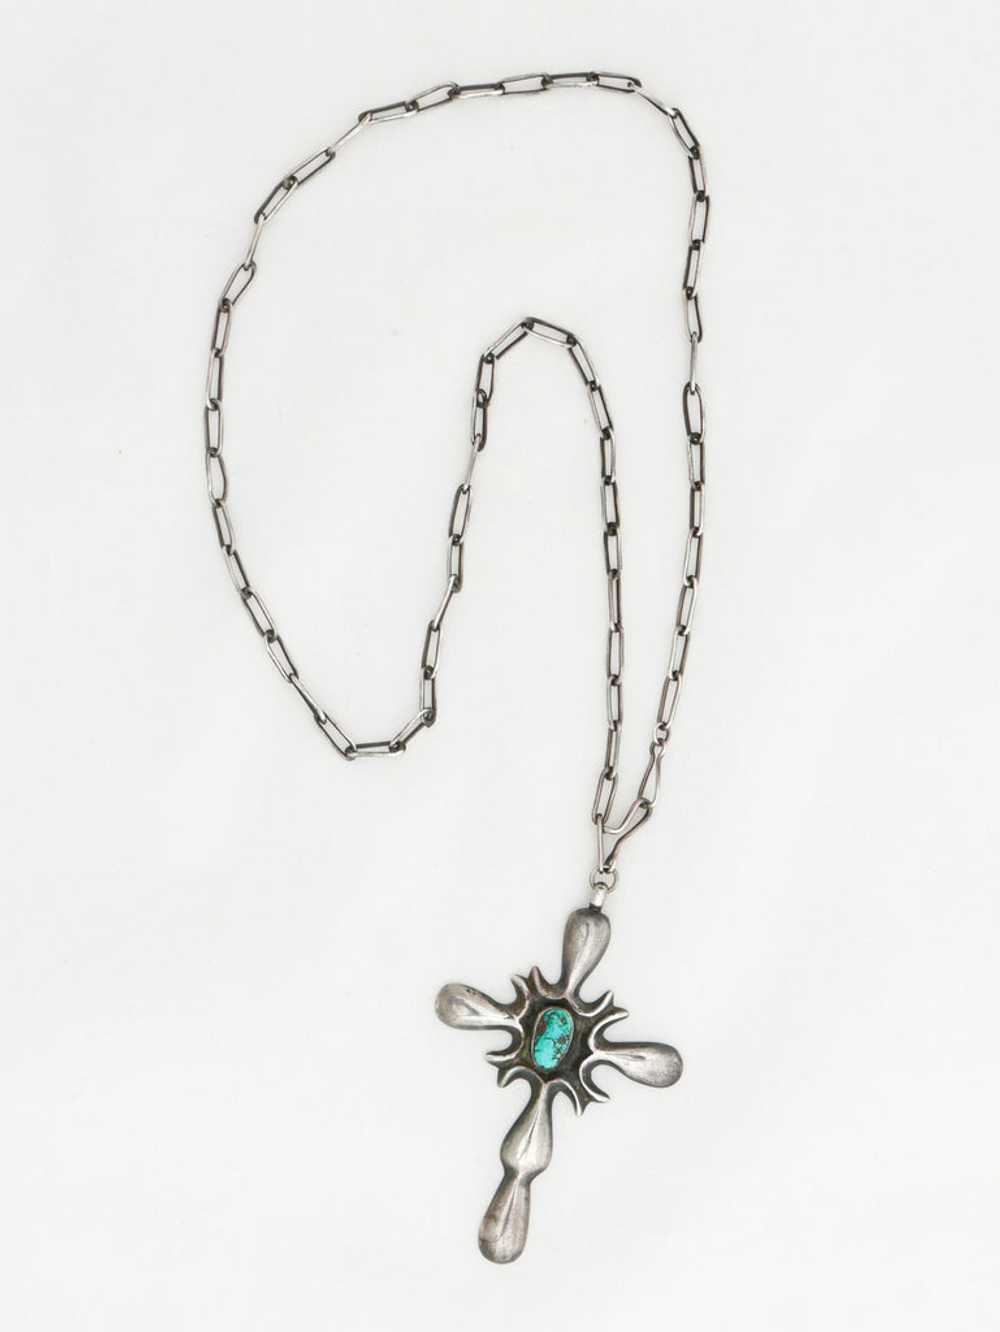 Turquoise & Sterling MCM Cross Necklace - image 1